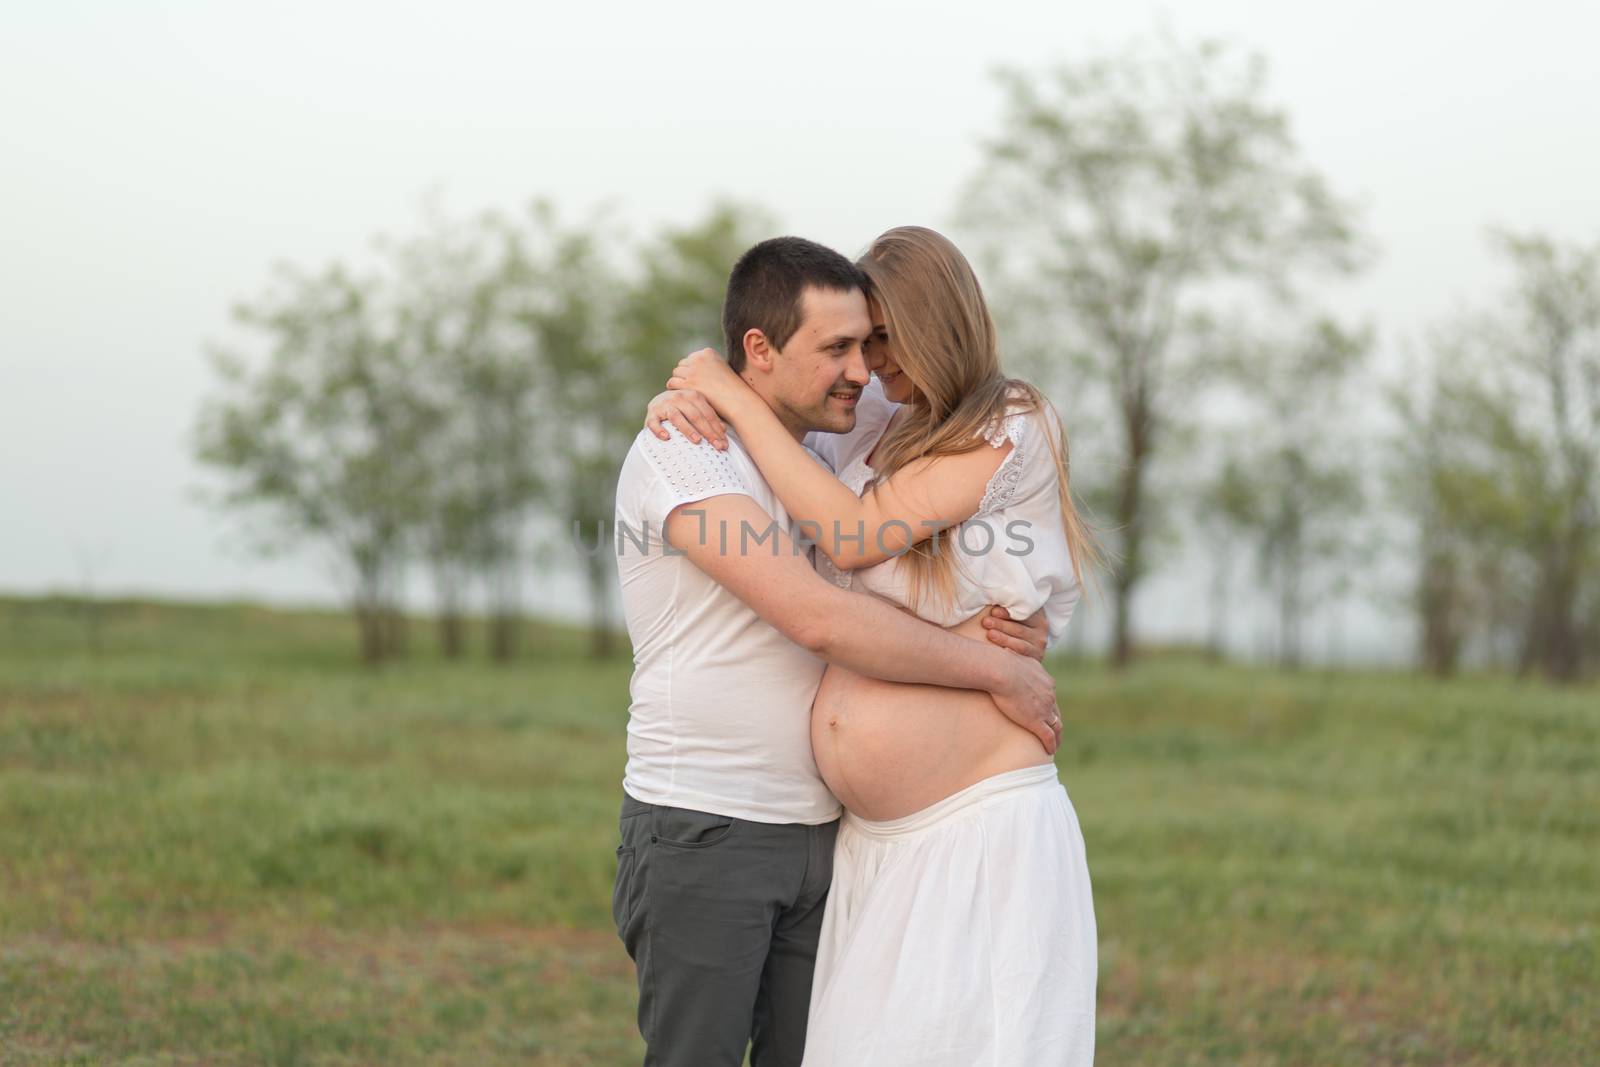 Happy moments of pregnancy. A loving husband with his pregnant wife in the fresh air away from the city by Try_my_best